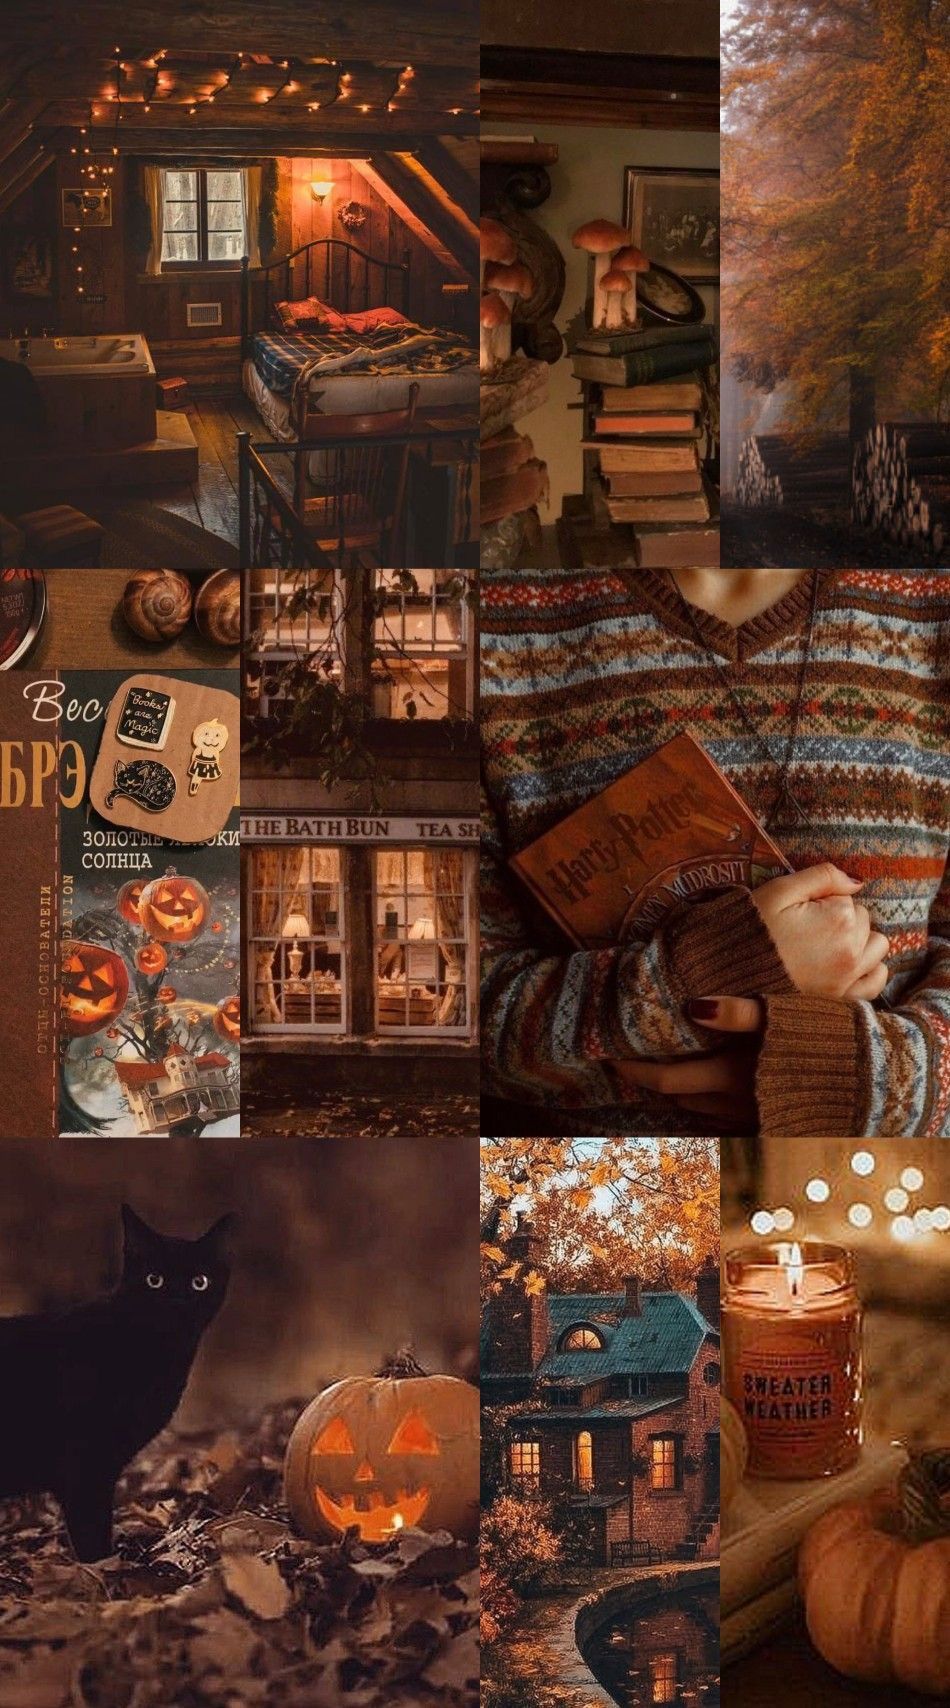 Cute Brown Aesthetic Wallpaper for Phone, Brown Collage Autumn. Fall wallpaper, Fall picture, Halloween decorations